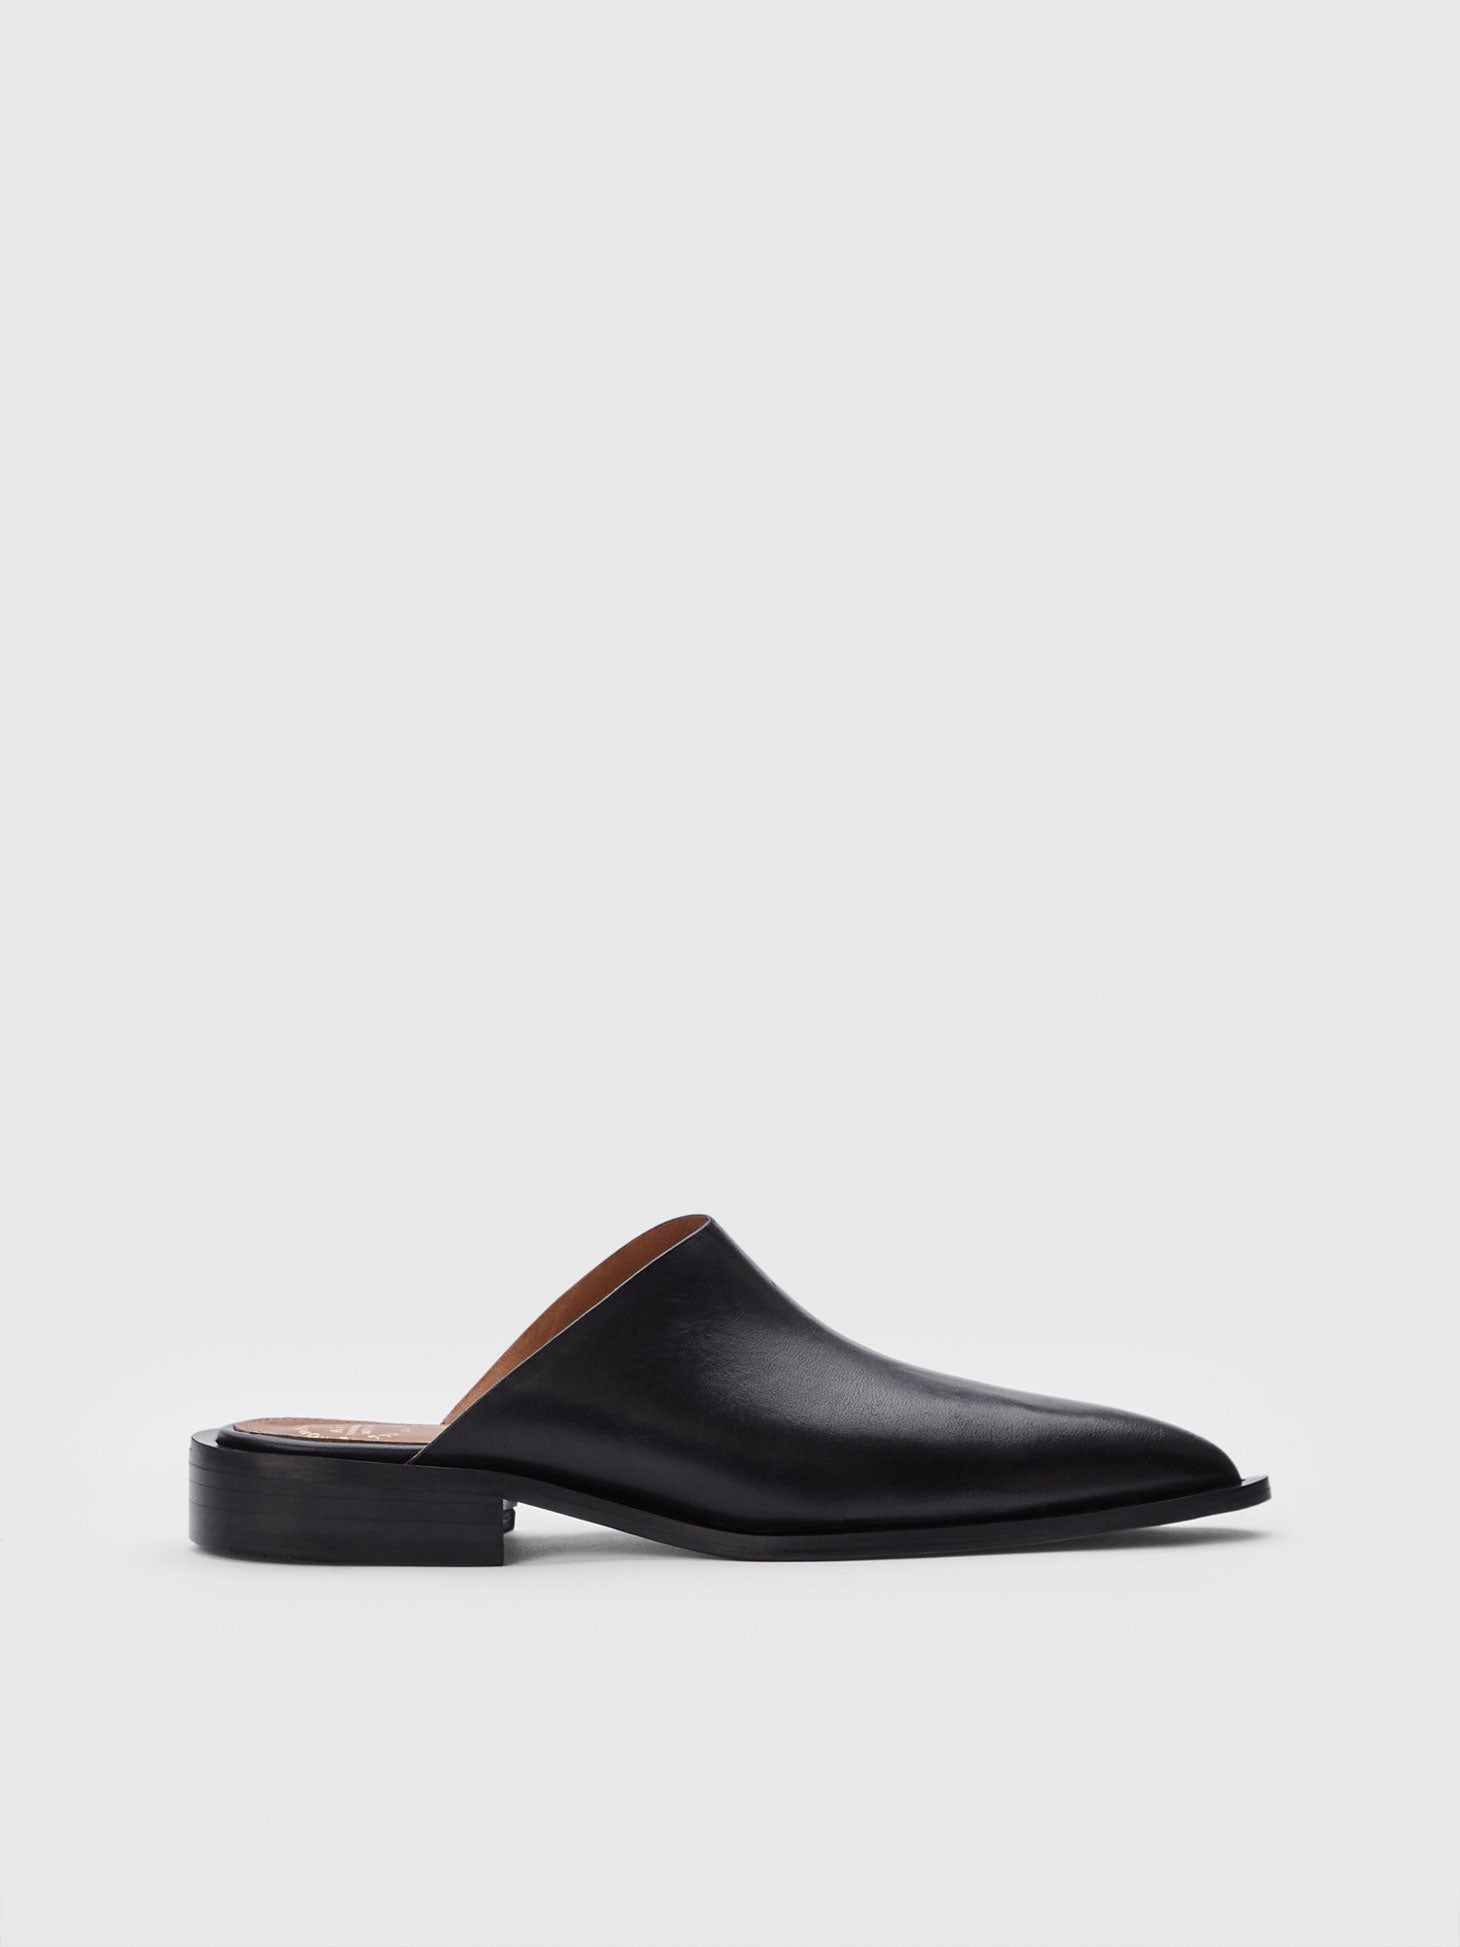 Telese Black Leather Mules